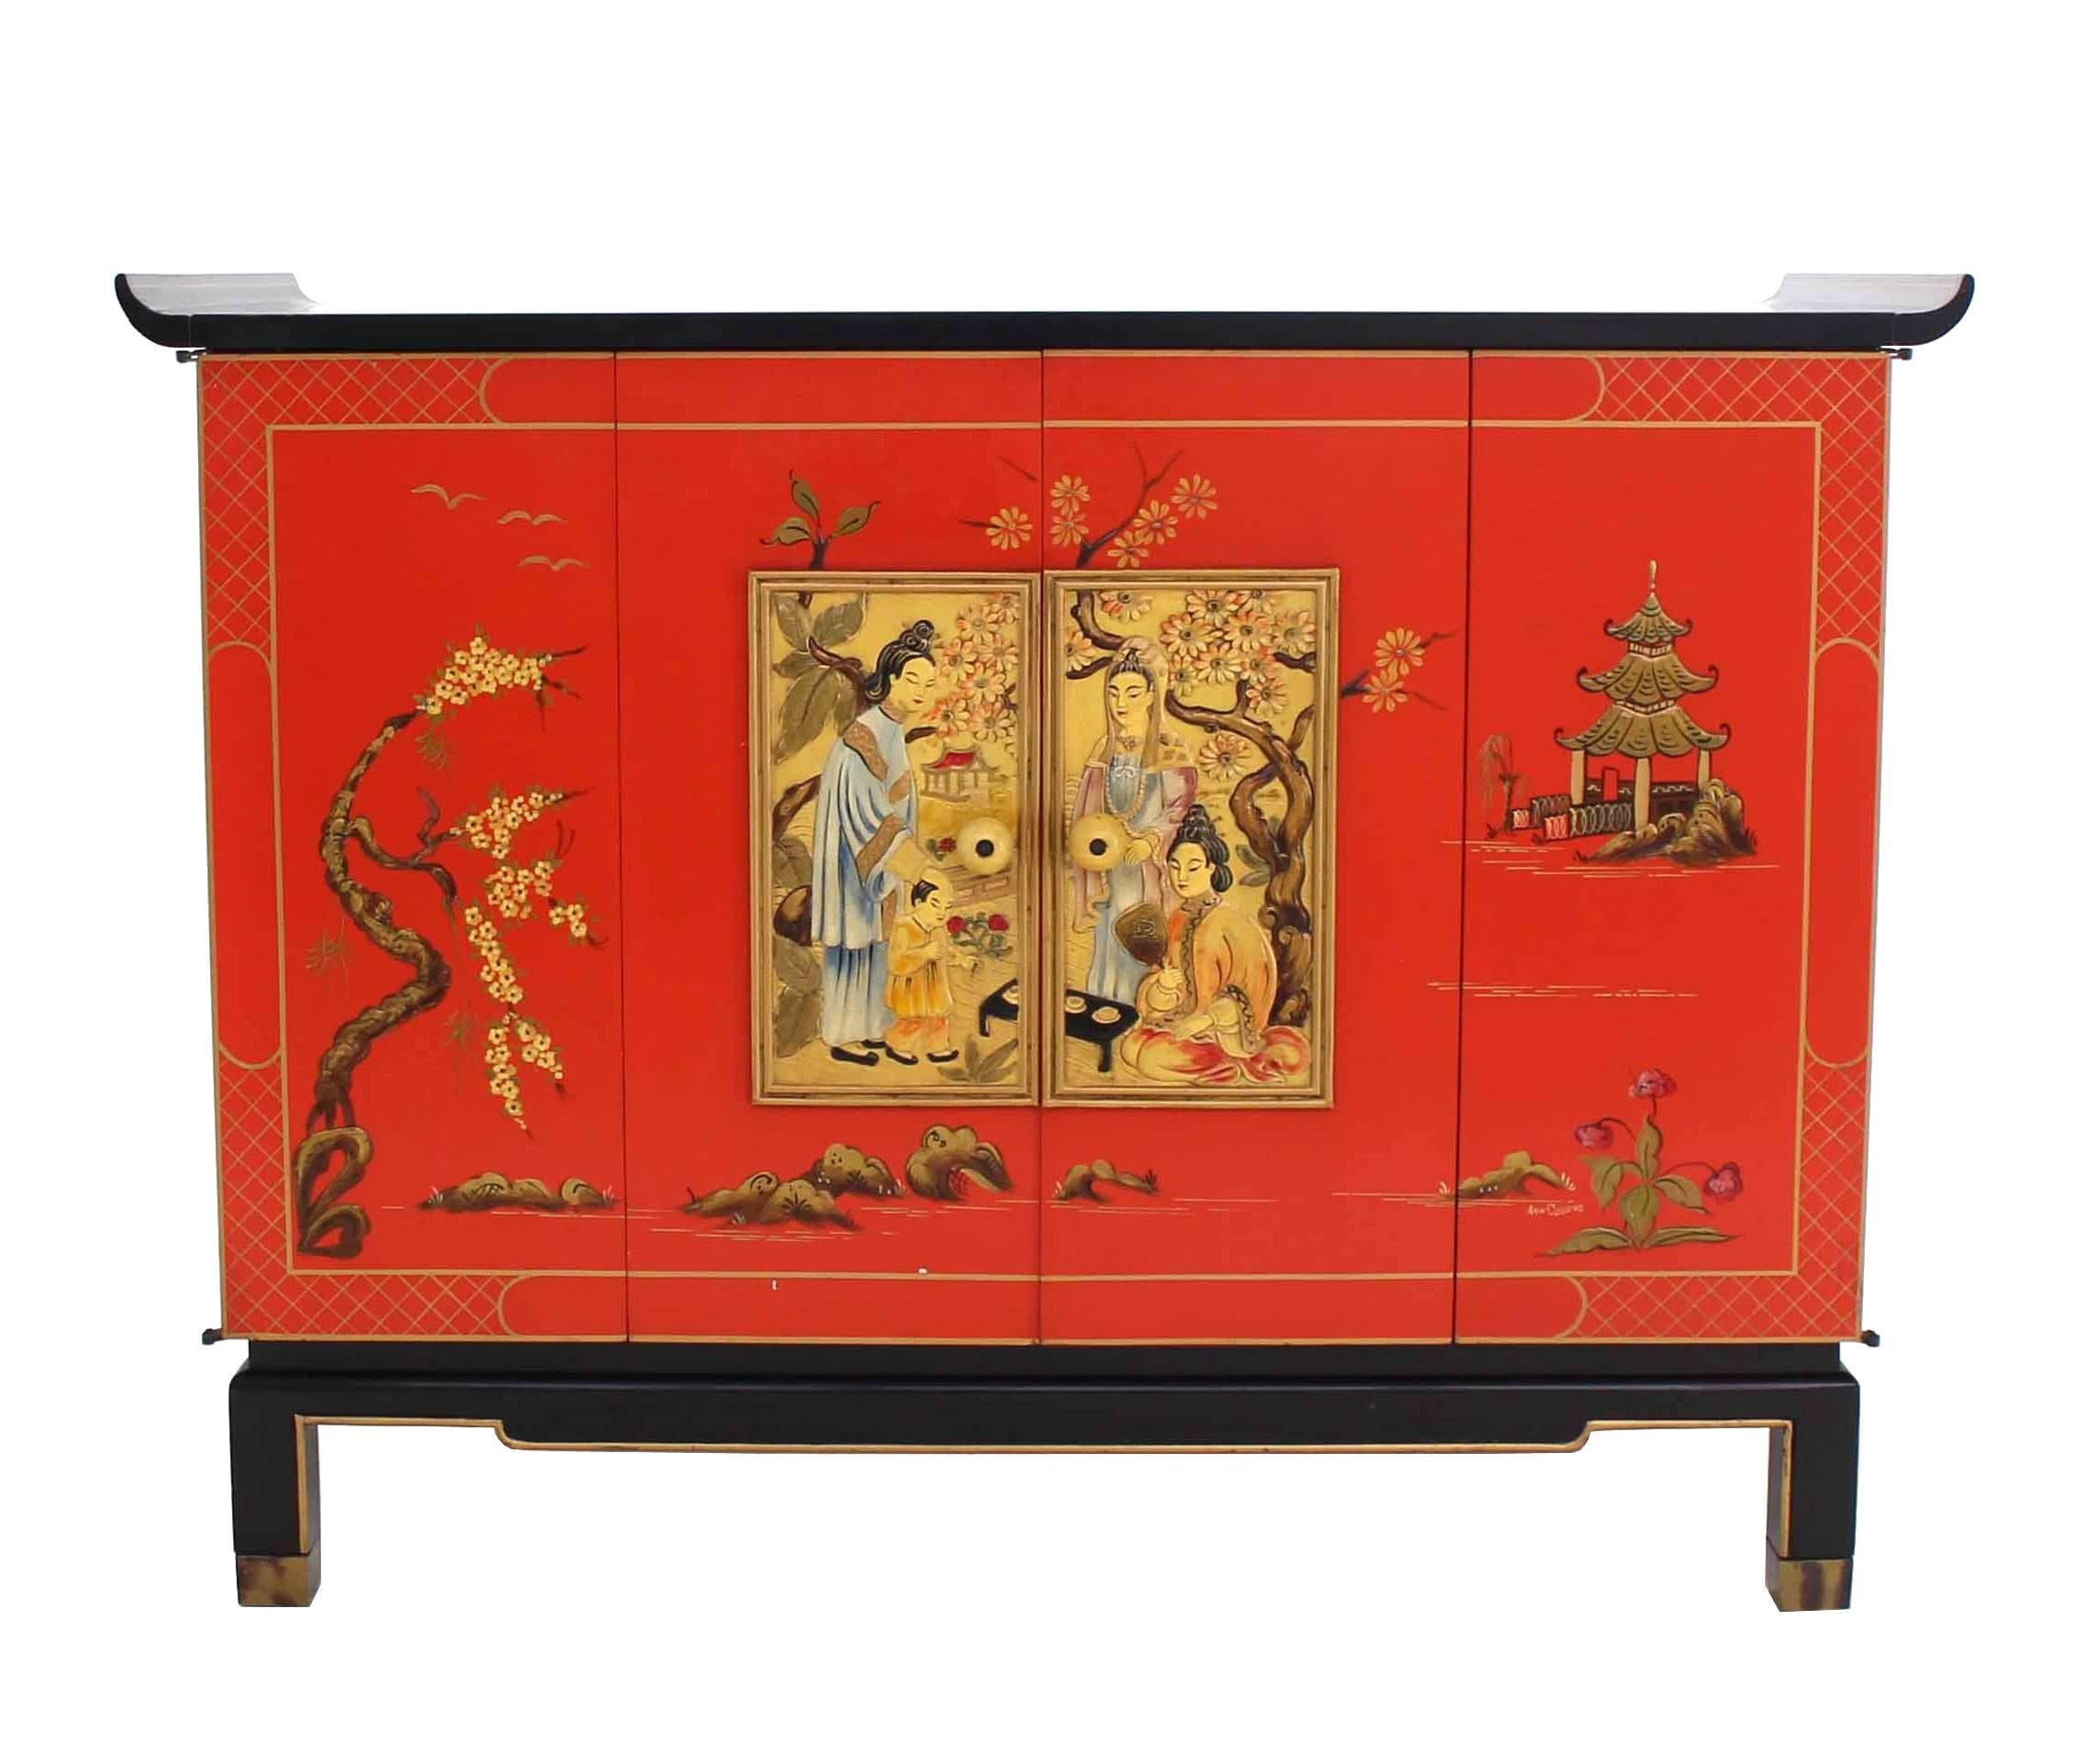 Very nice black lacquer cabinet with two oriental motive decorated accordion style doors.